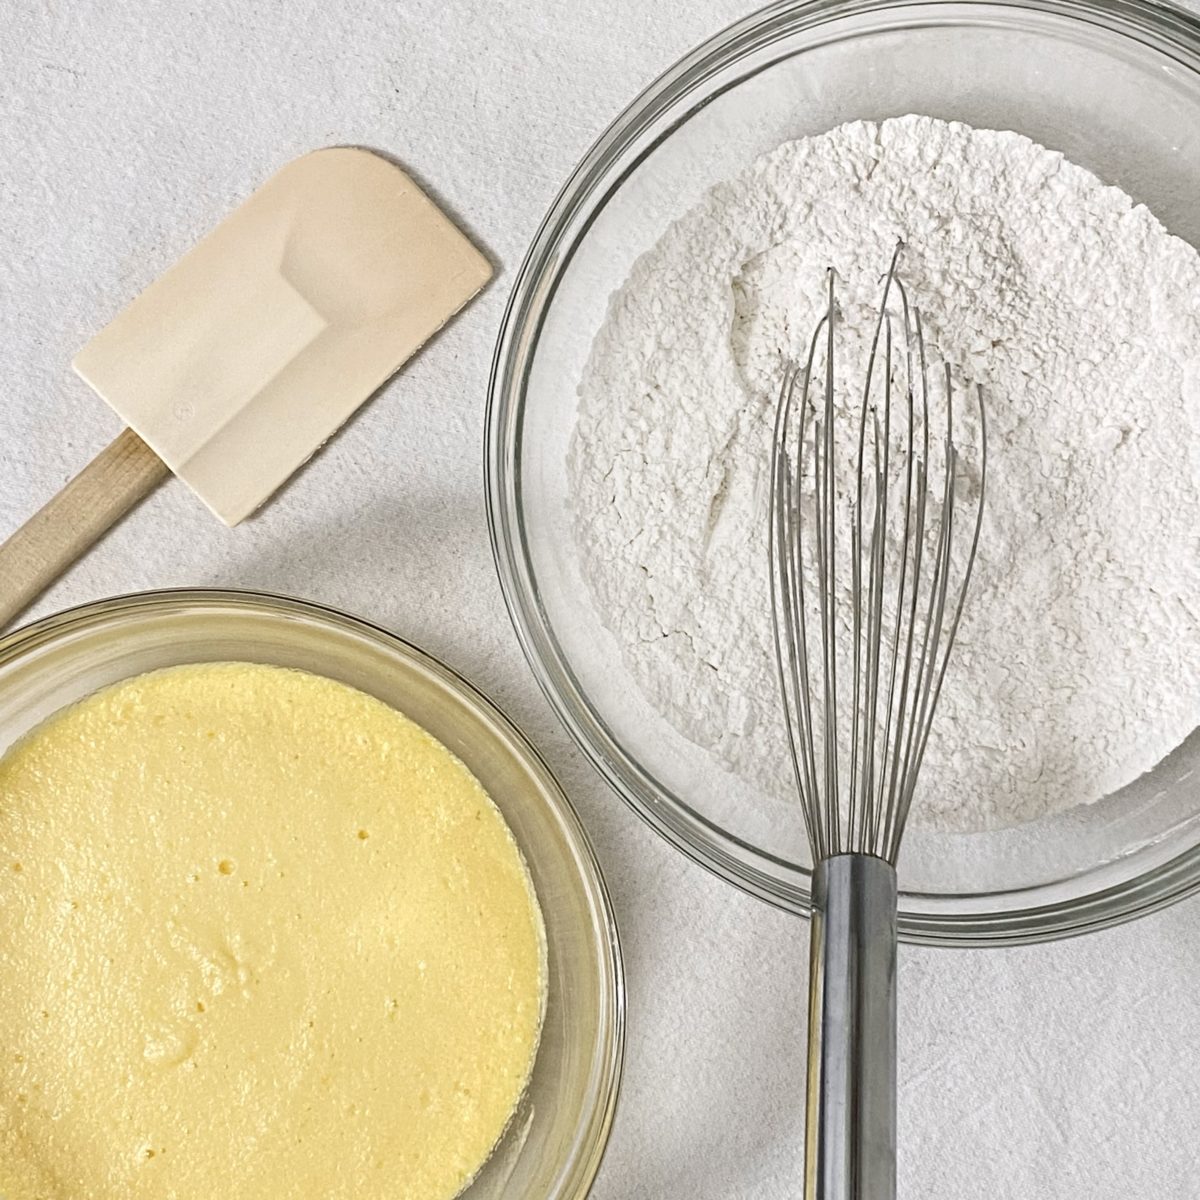 Flour mixture and butter and sugar mixture each in their own bowls with a spatula and whisk near them.